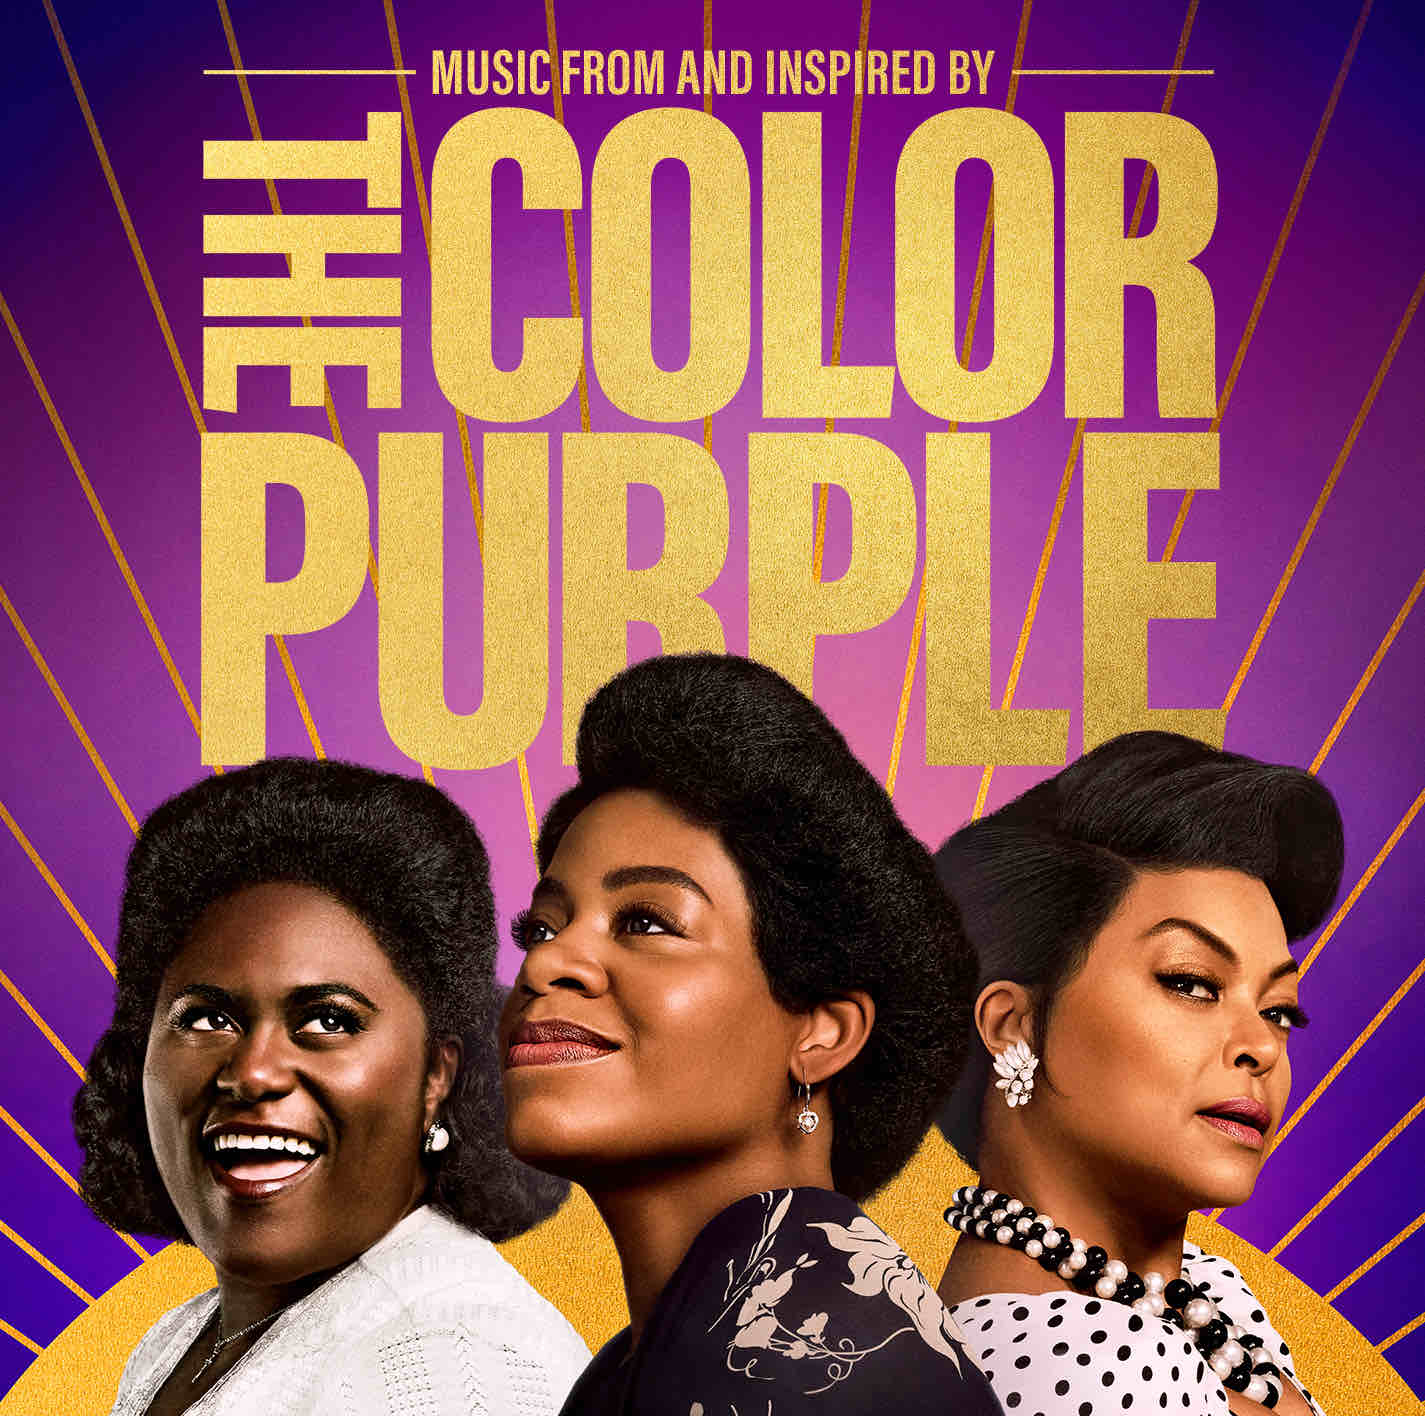 VARIOUS ARTISTS - The Colour Purple (Music From And Inspired By) - 2CD [MAR 8]